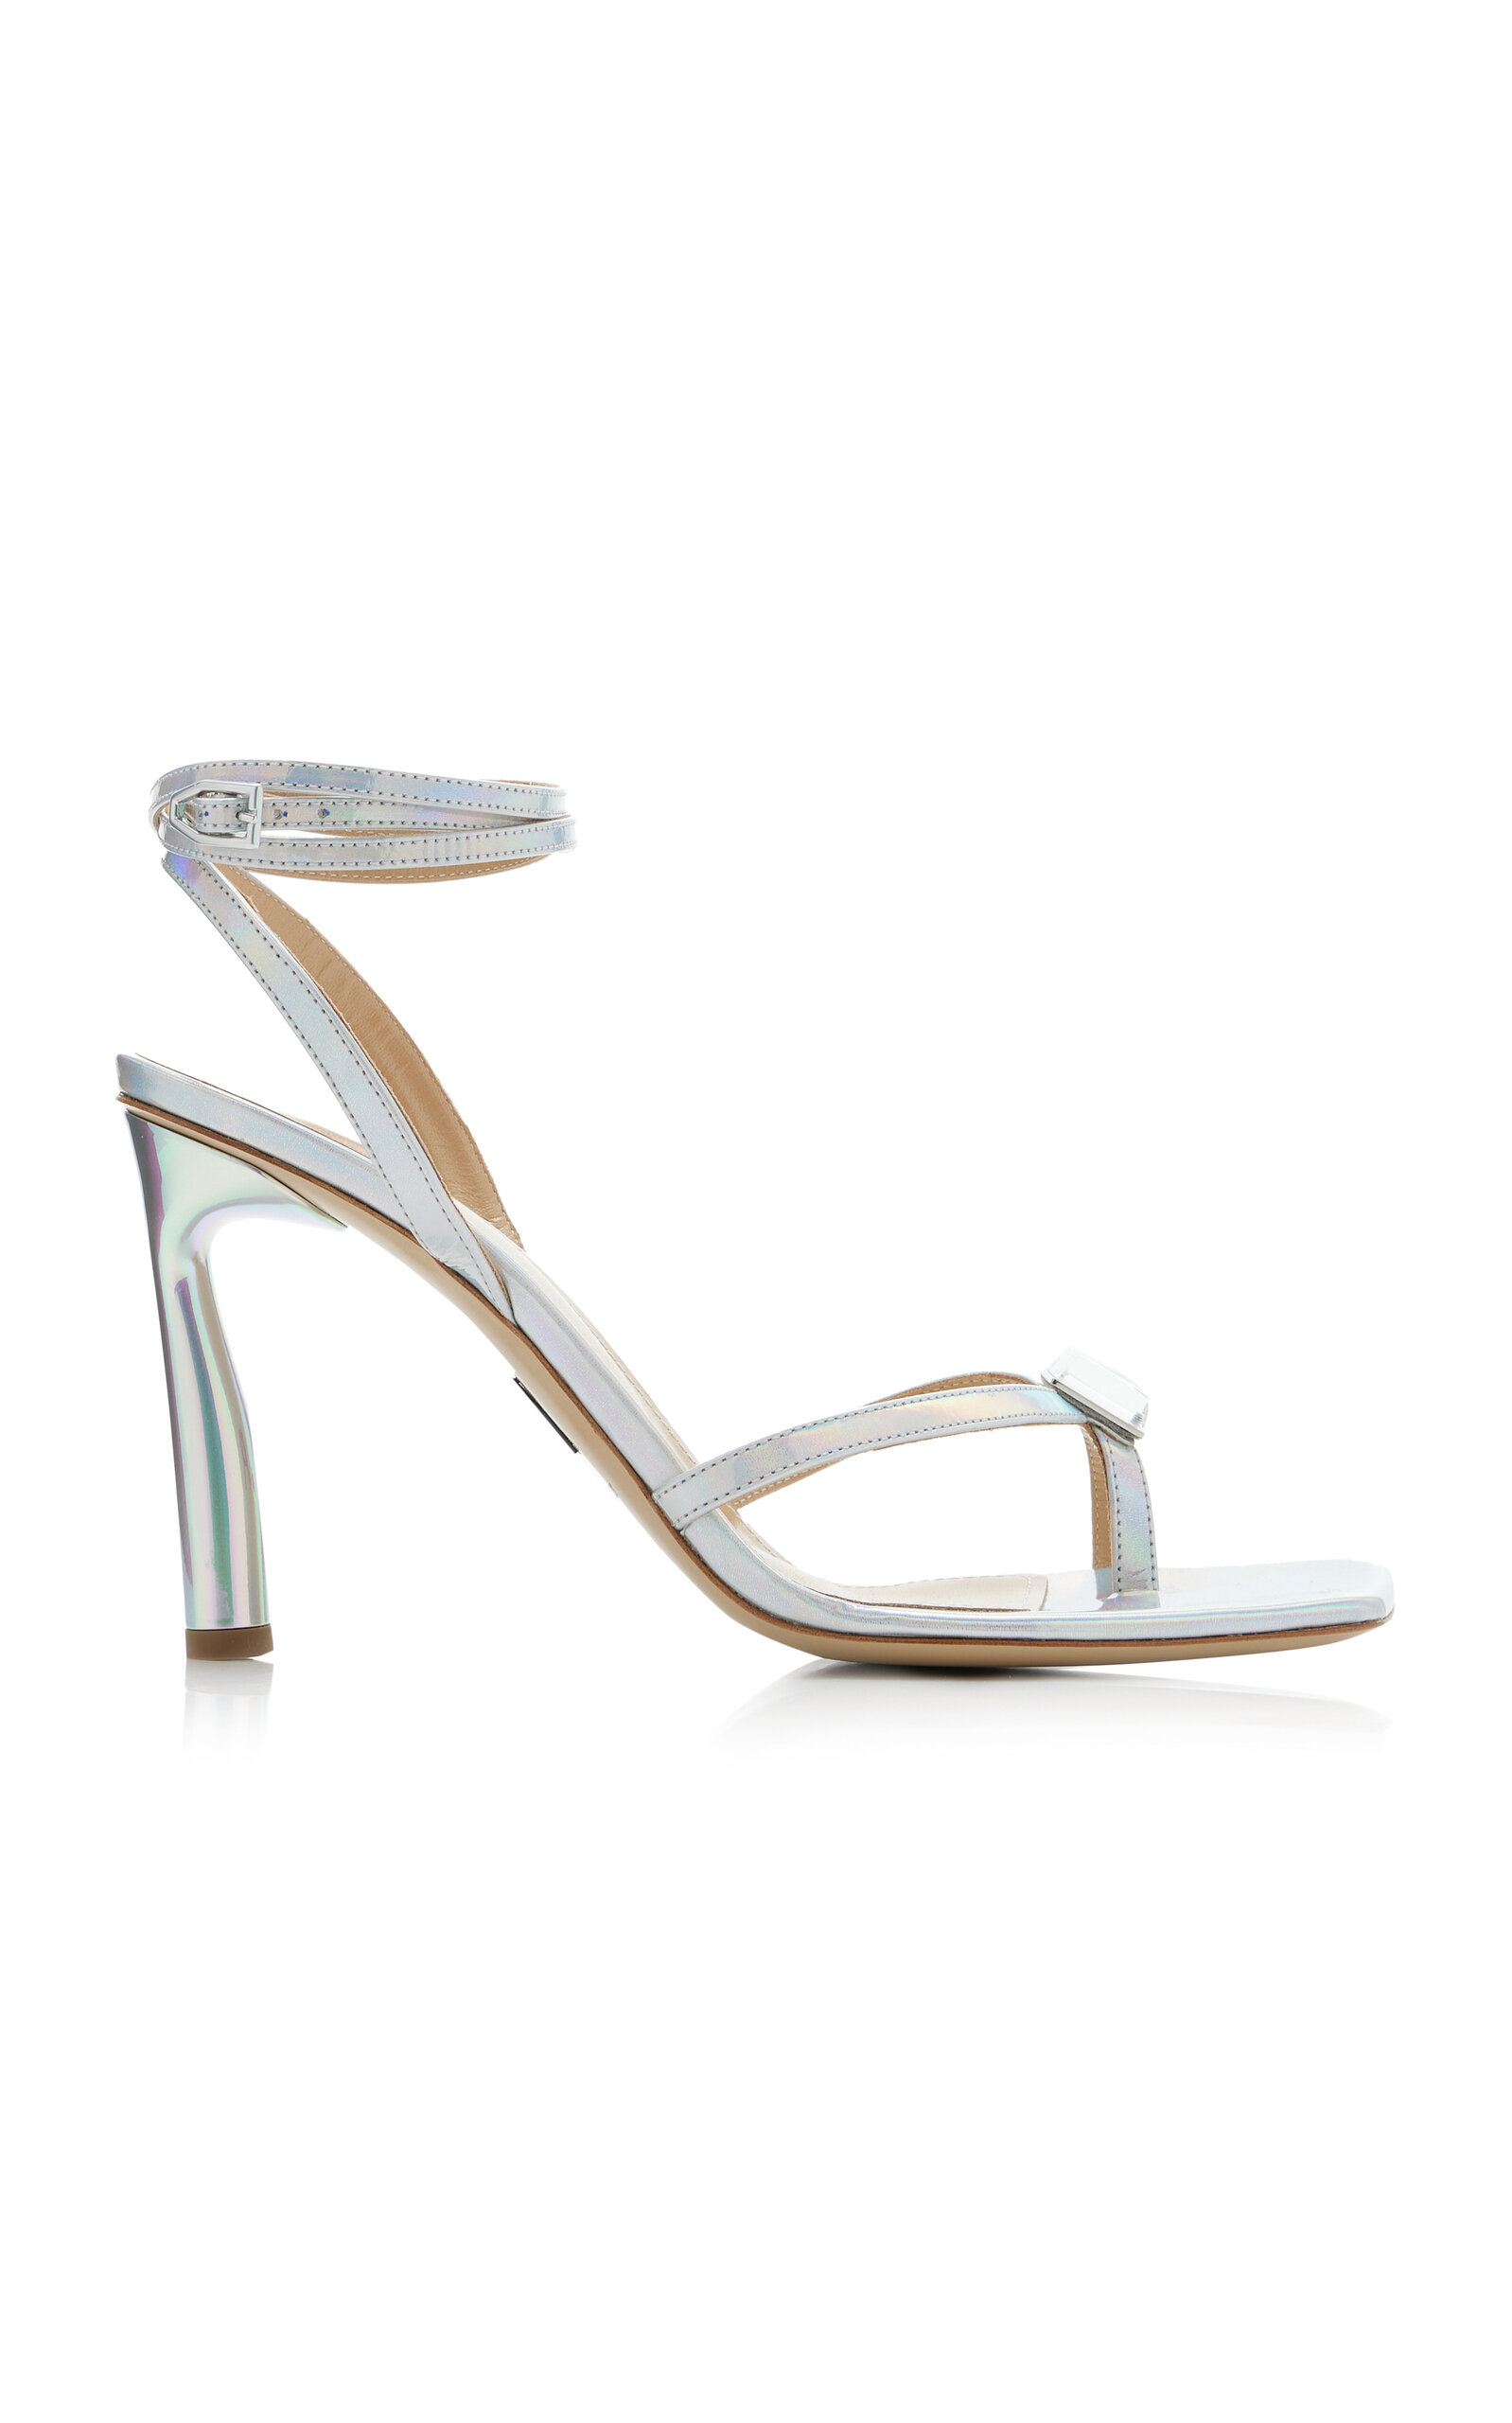 Paul Andrew Iridescent Mirrored Leather Sandals In Silver